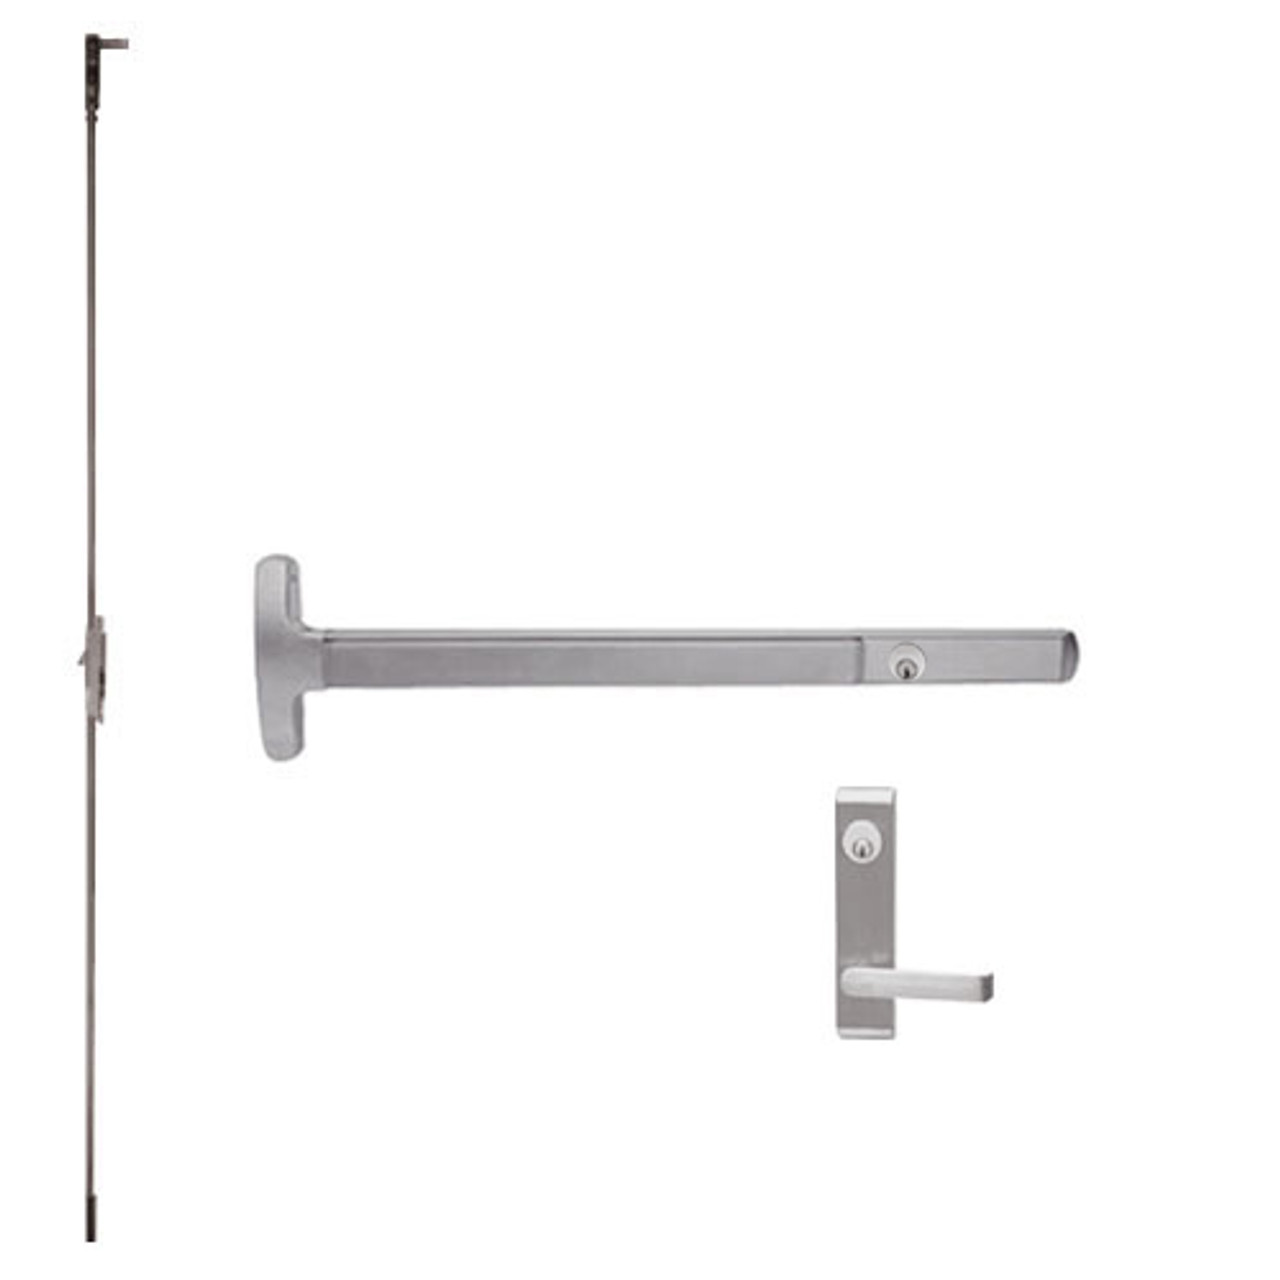 CD24-C-L-NL-DANE-US32D-3-RHR Falcon Exit Device in Satin Stainless Steel